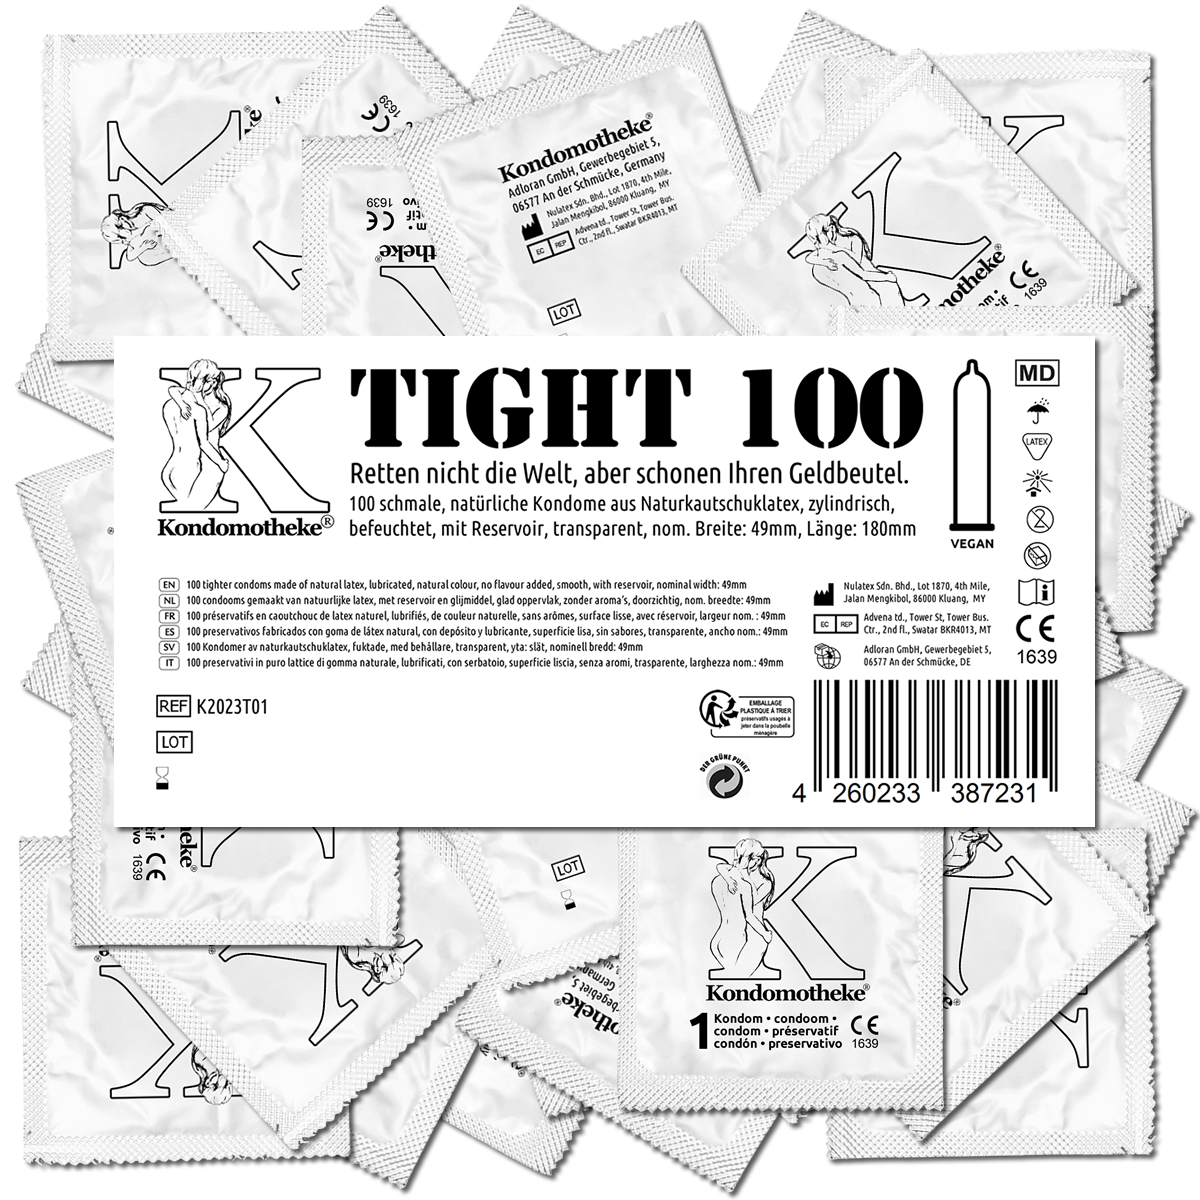 Kondomotheke «TIGHT» 100 tighter condoms for a close fit without slipping off- the inexpensive premium condoms 